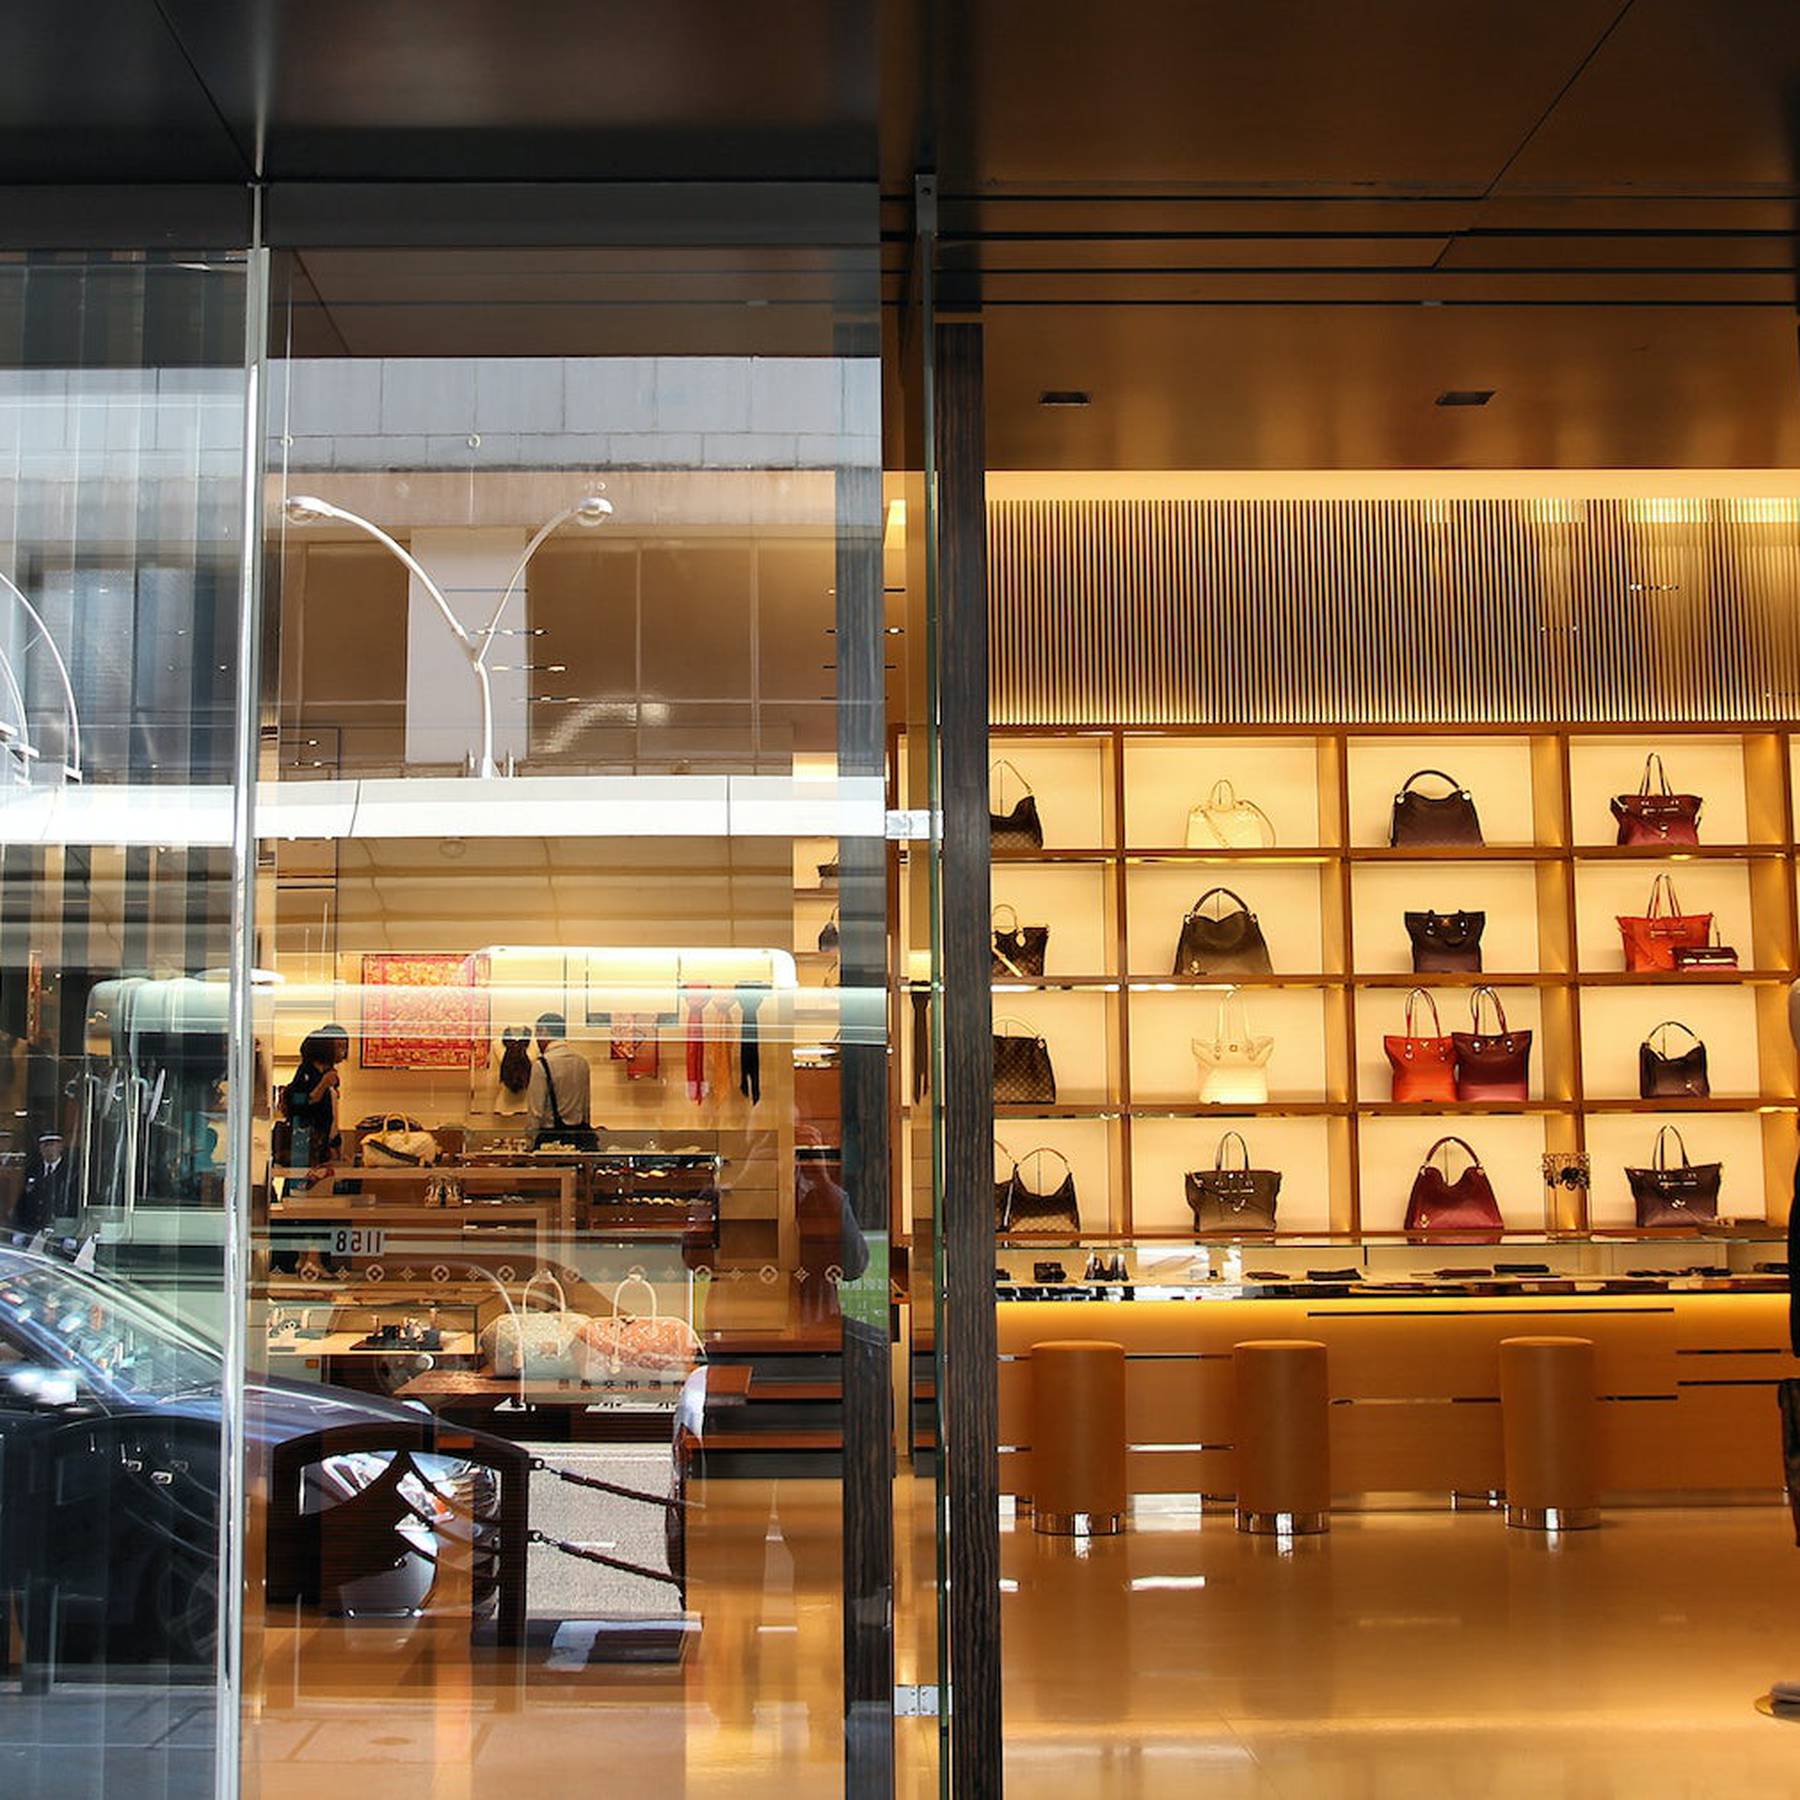 Record year for LVMH Moet Hennessy Louis Vuitton - Inside Retail Asia